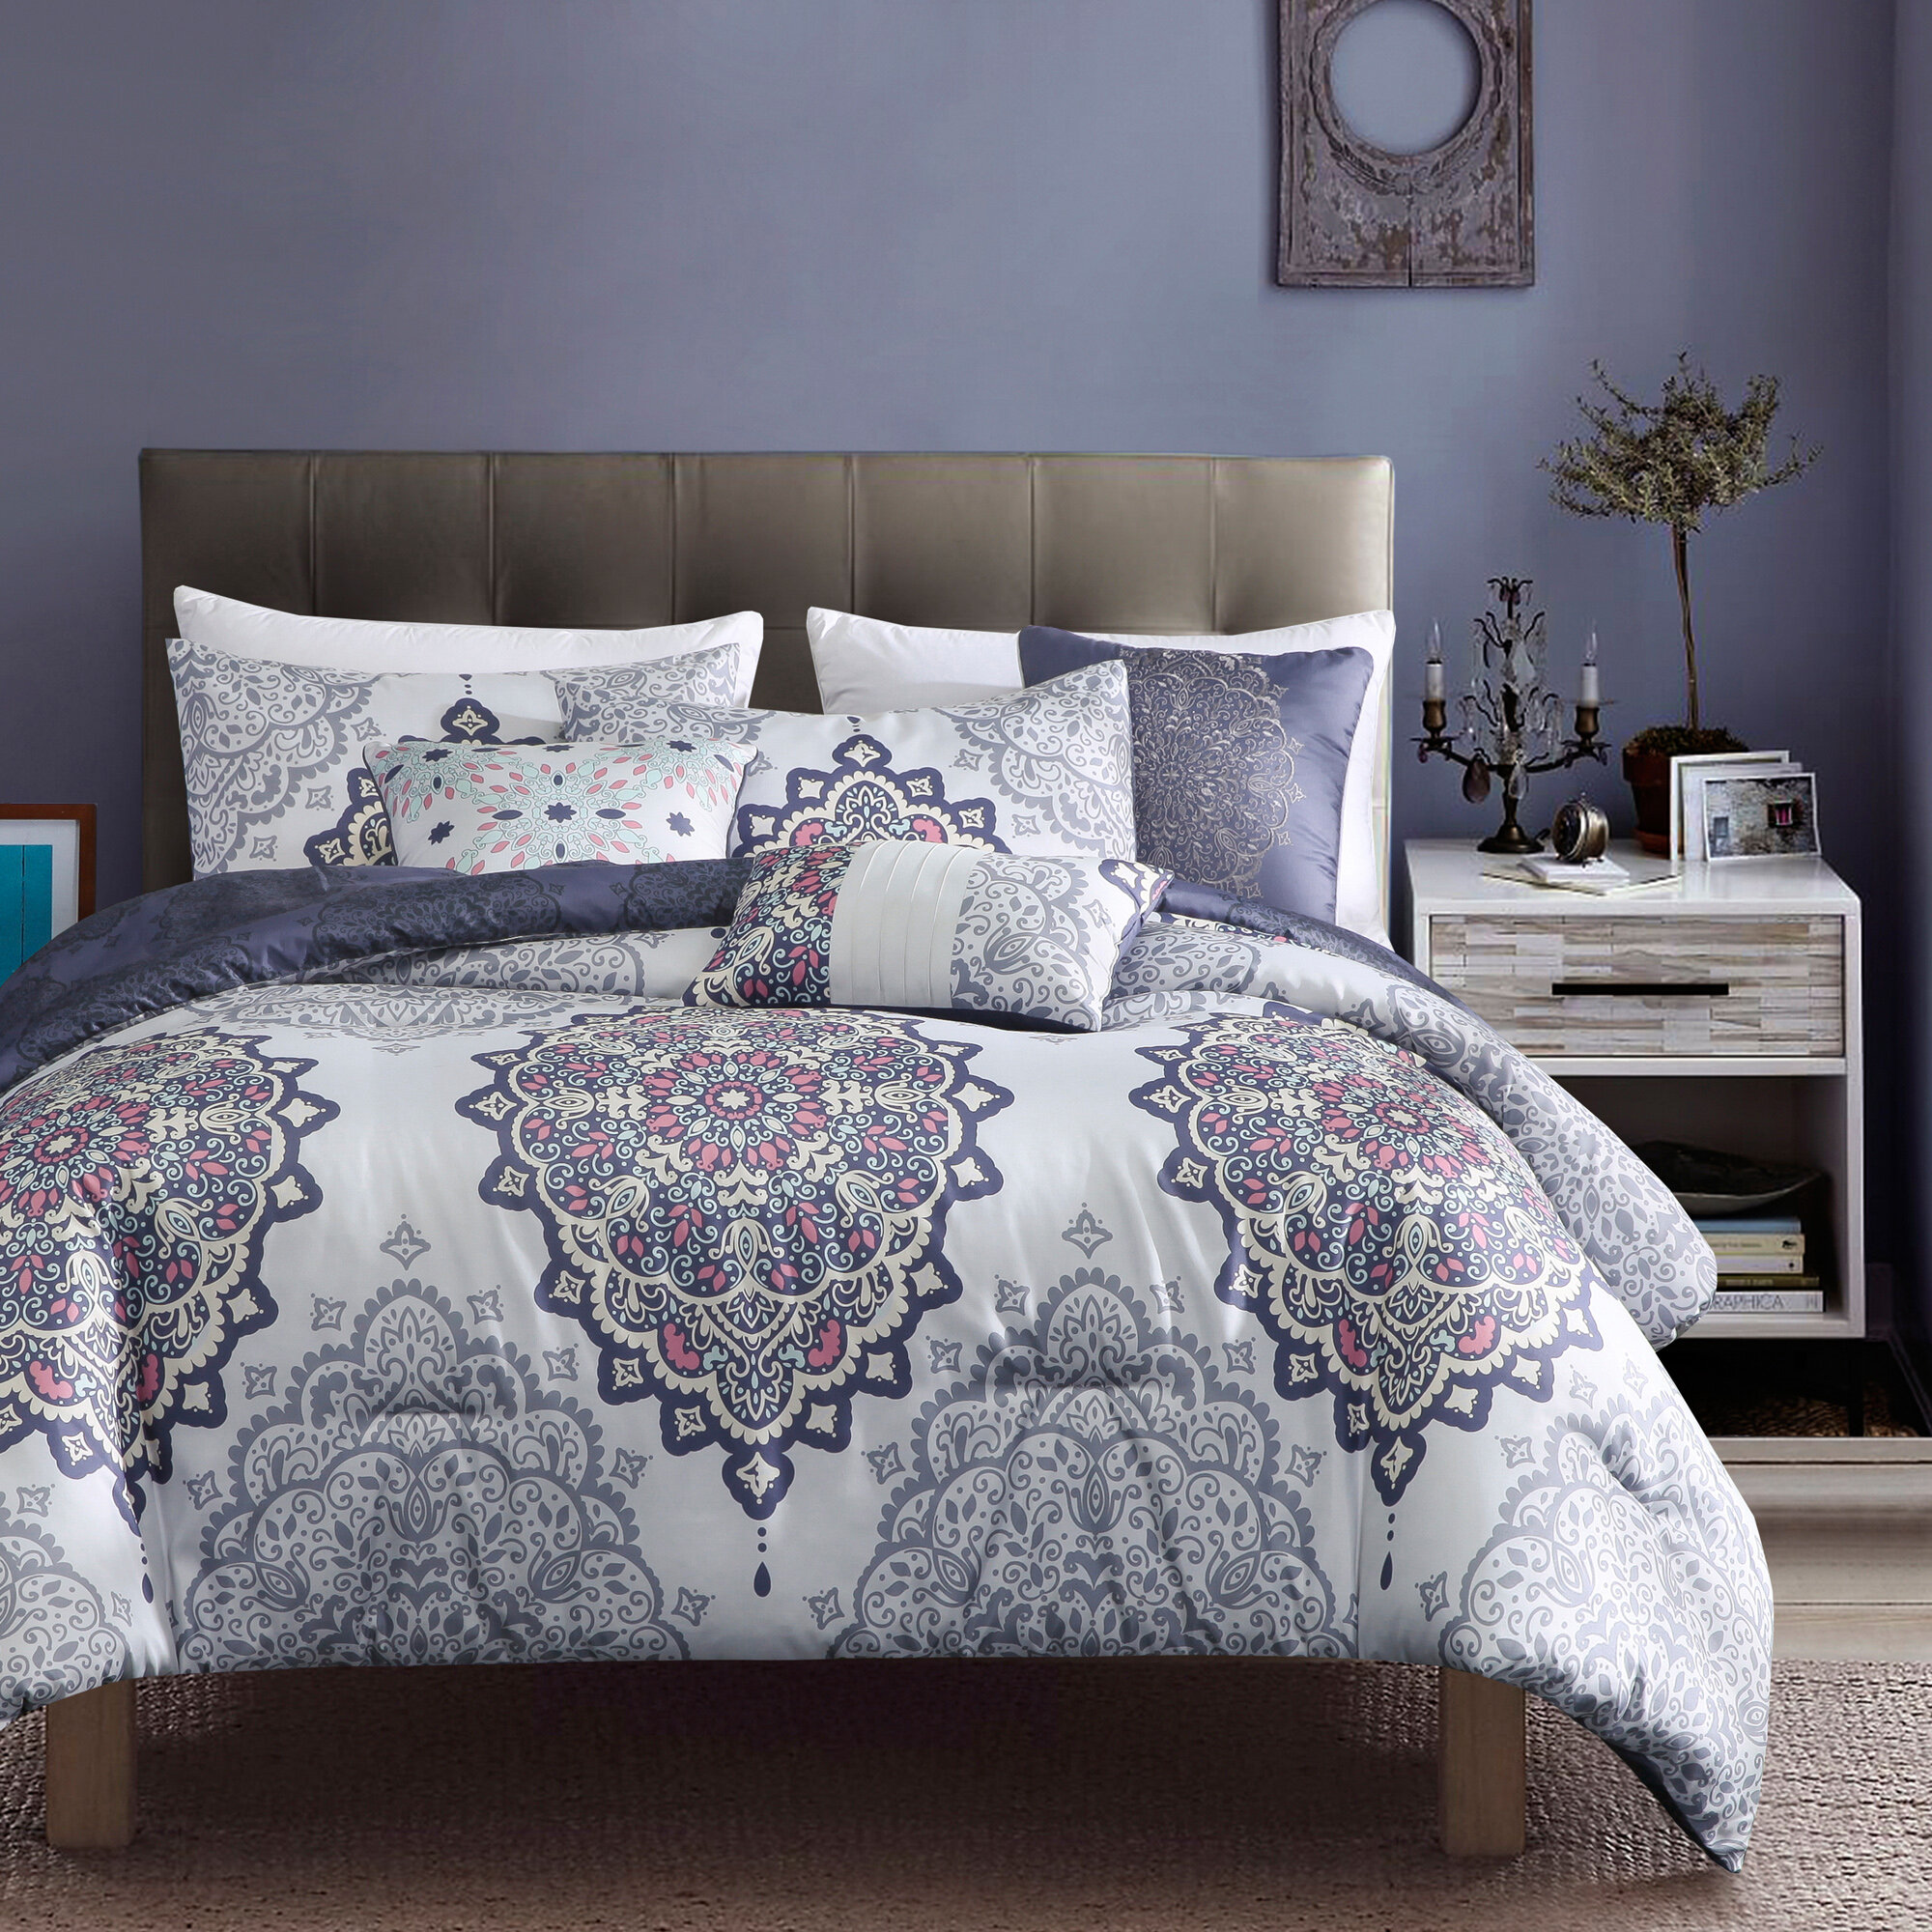 Malia, Full / Queen Brushed Microfiber for a Soft & Luxurious Feel s By Blissful Living Down Alternative Printed 4-5 Piece Comforter Set Including 2 Decorative Pillows and Sham Morgan Home Fashions